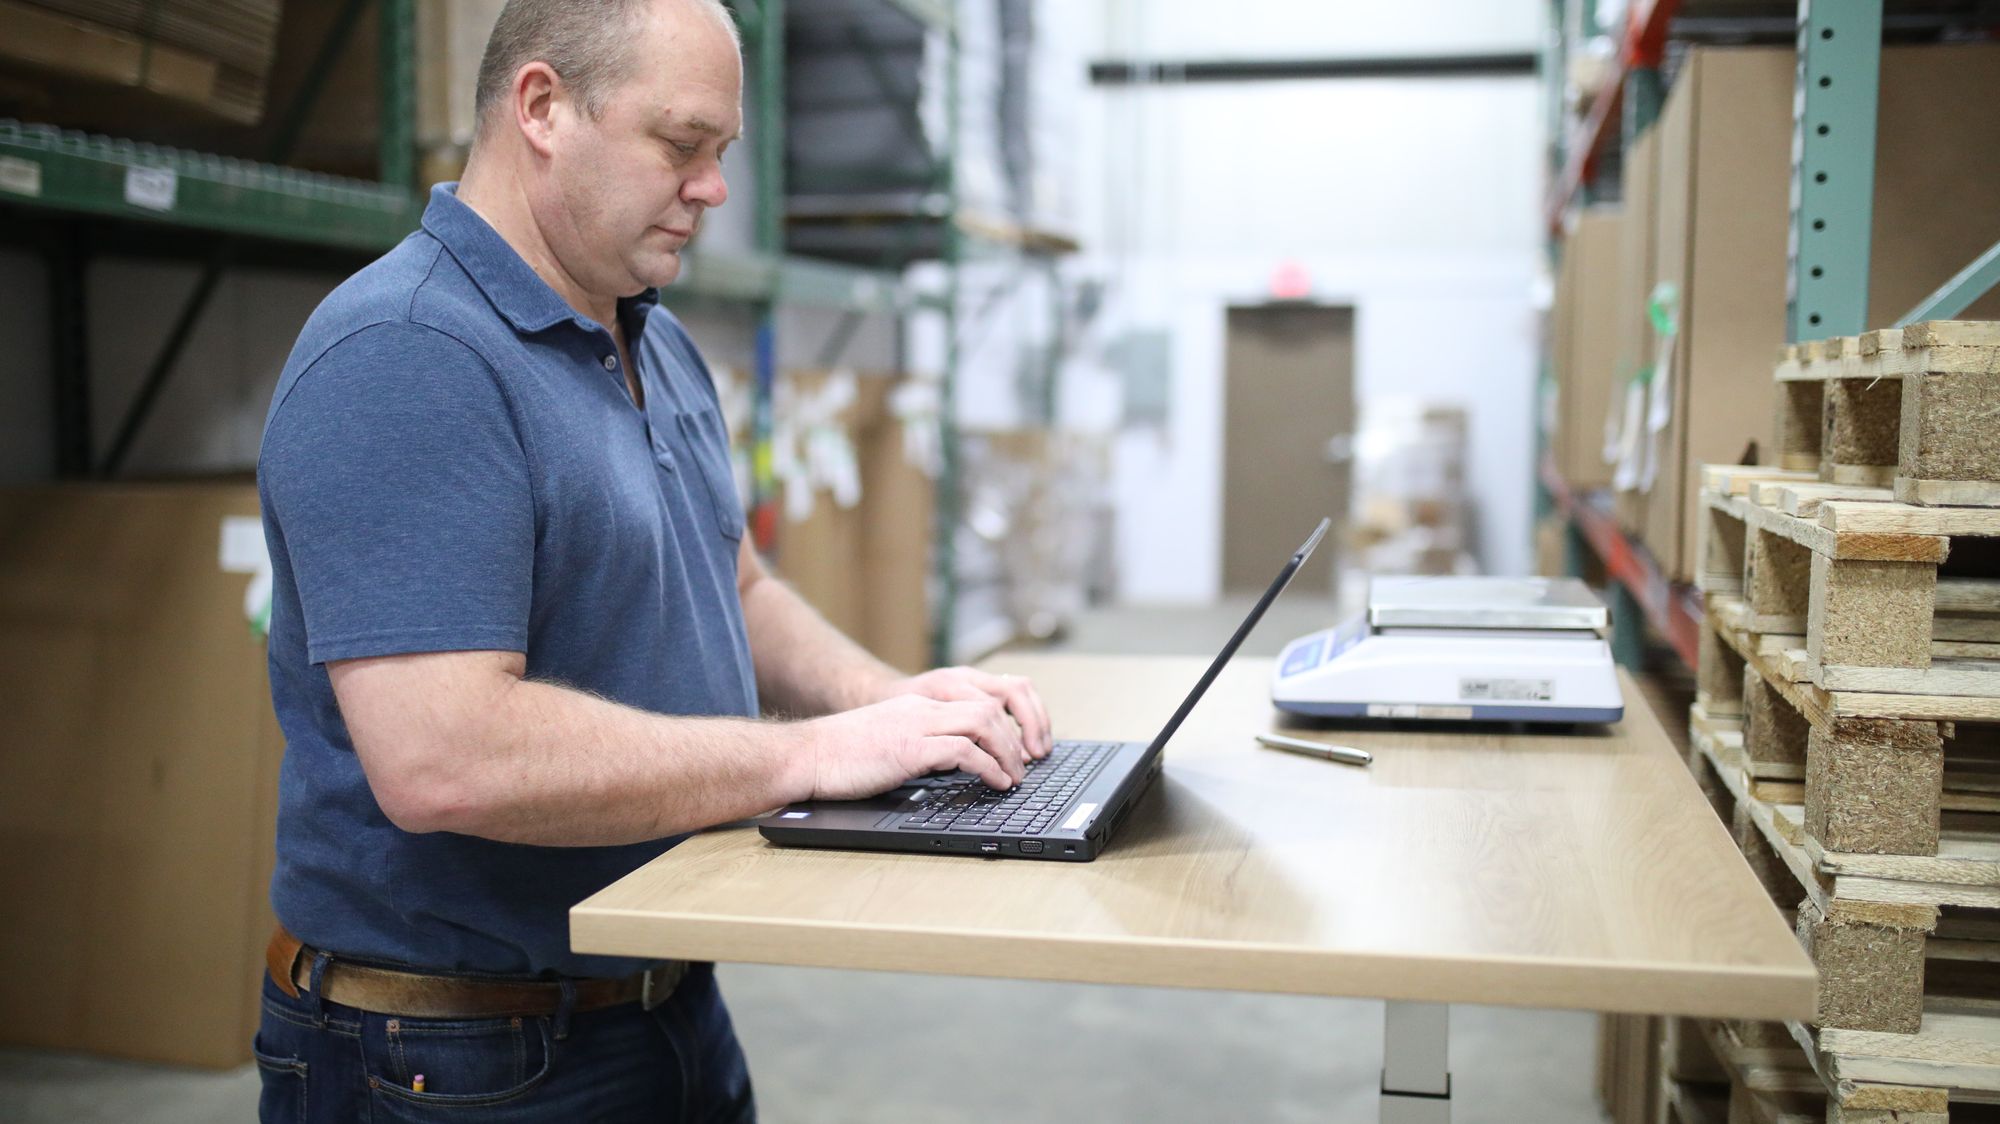 10 Benefits of Business Intelligence in Manufacturing